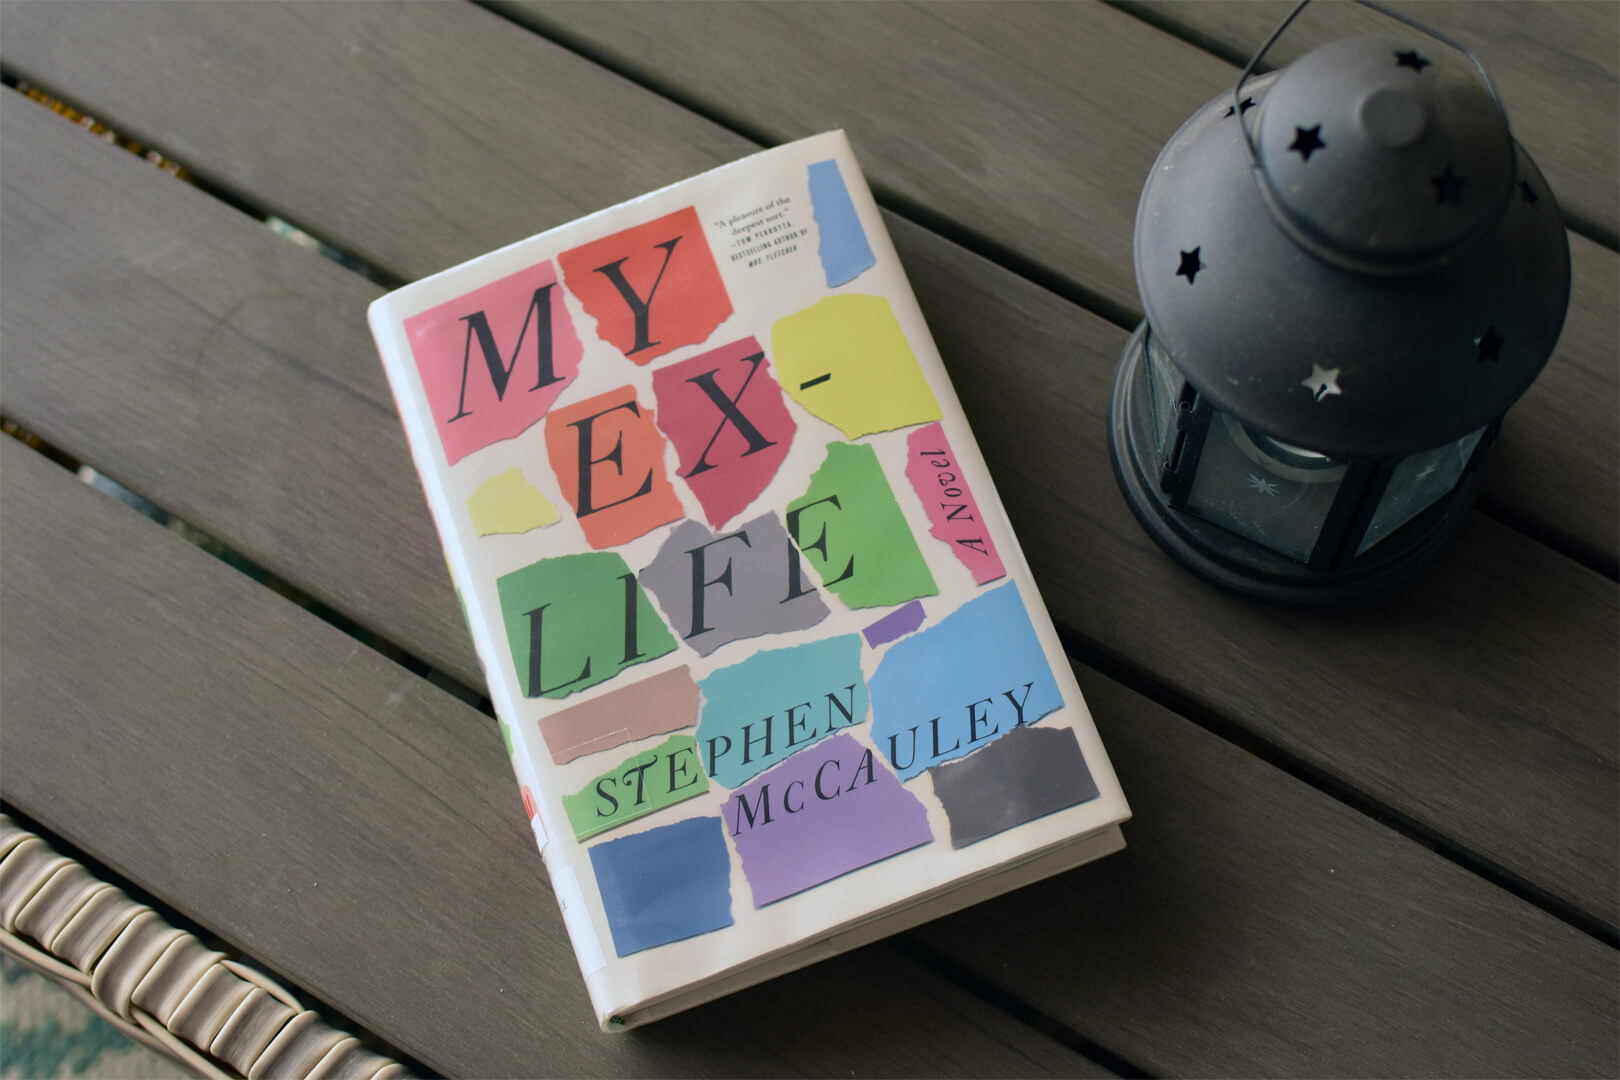 Review: My Ex-Life by Stephen McCauley